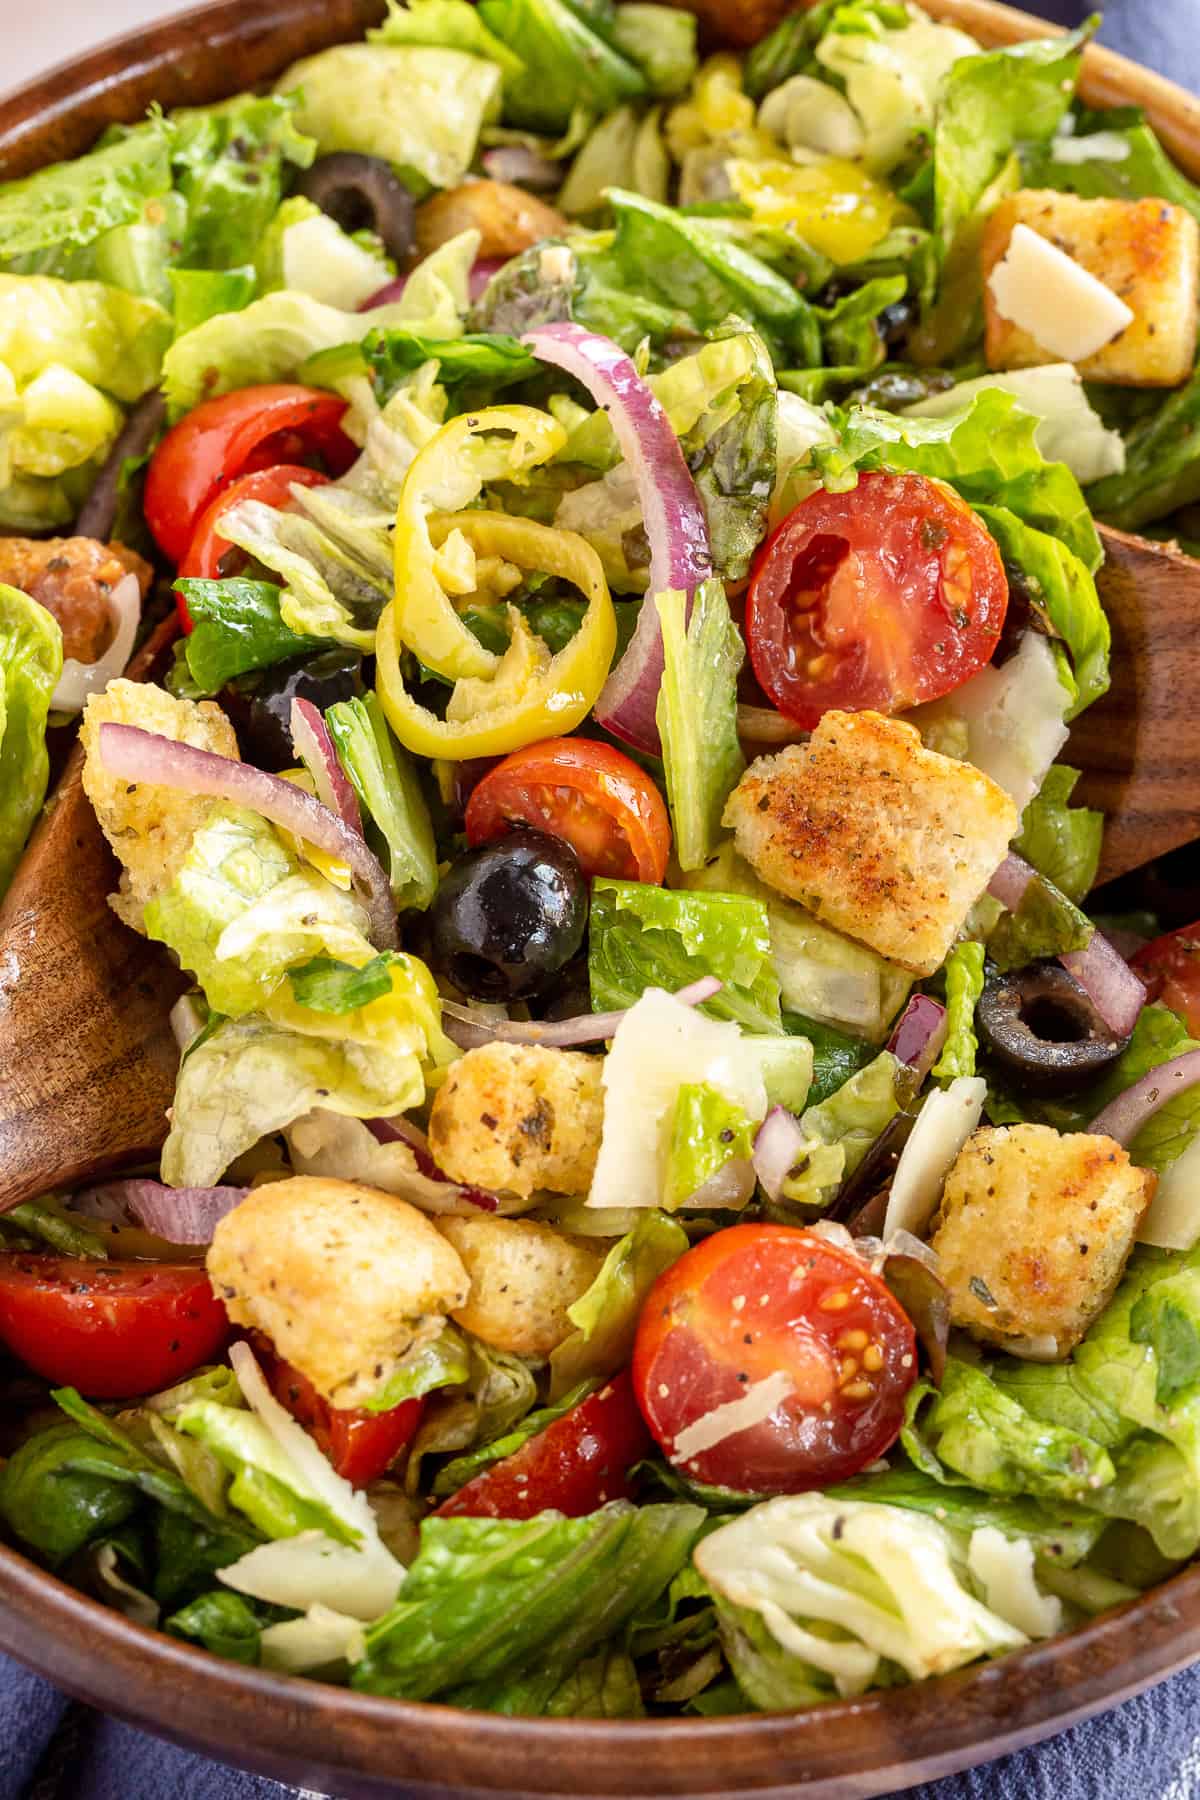 A close up of a salad with tomatoes, olives, croutons and parmesan.